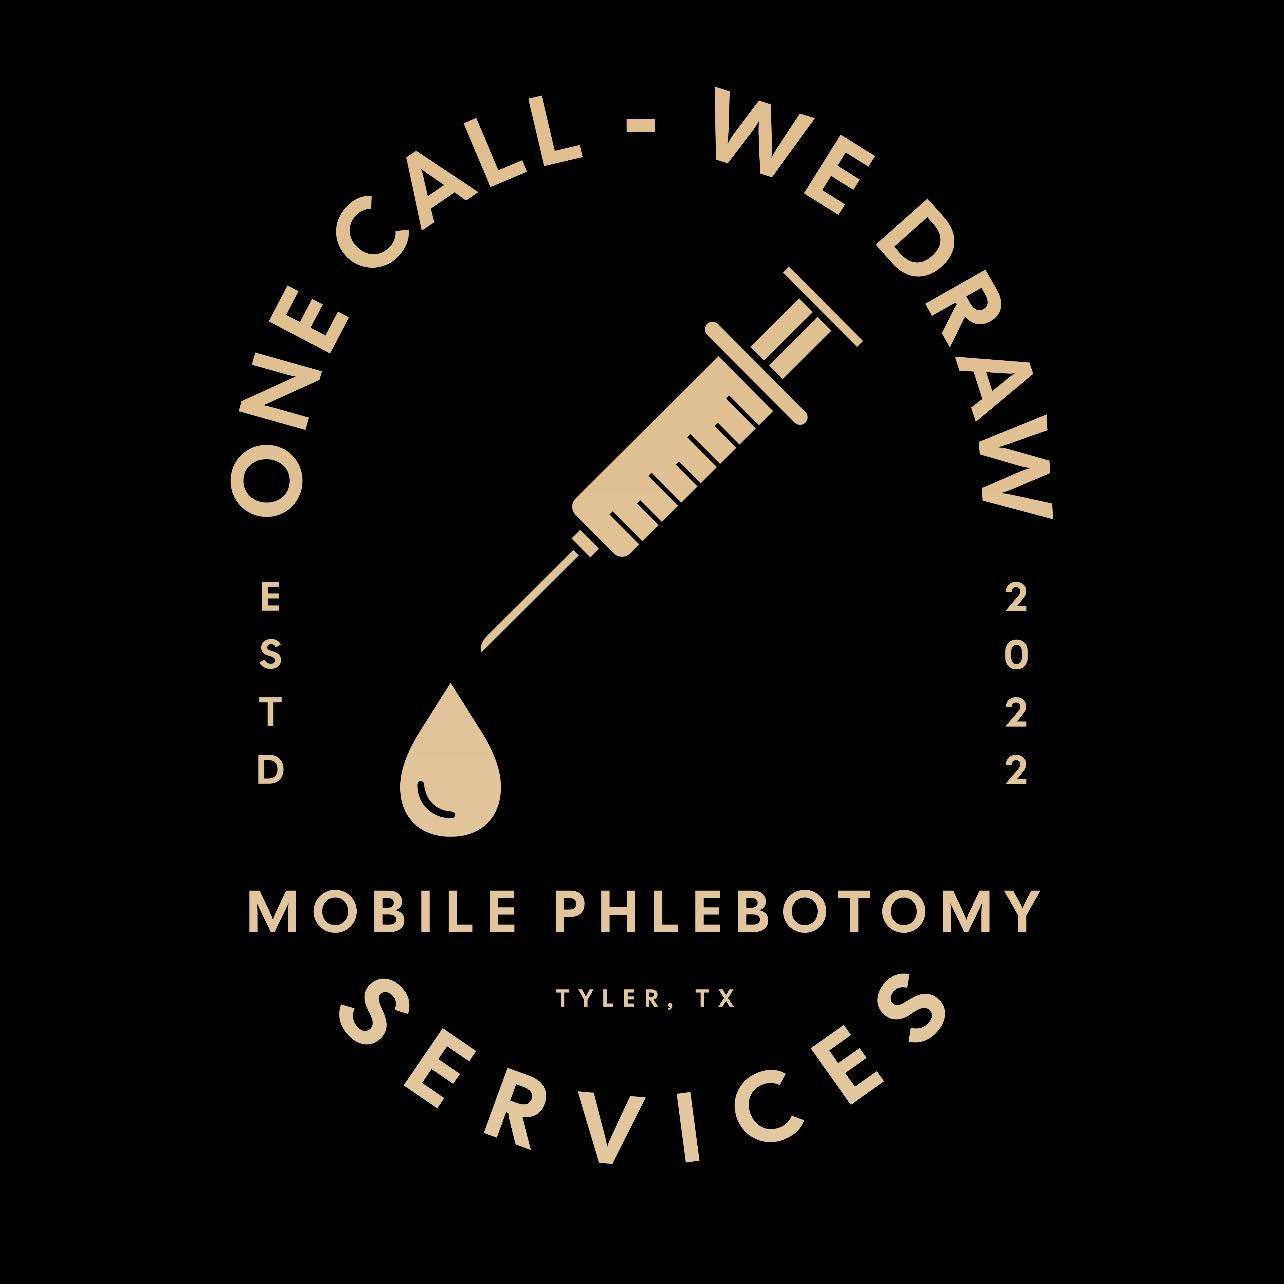 One Call We Draw Mobile Phlebotomy Services LLC Logo